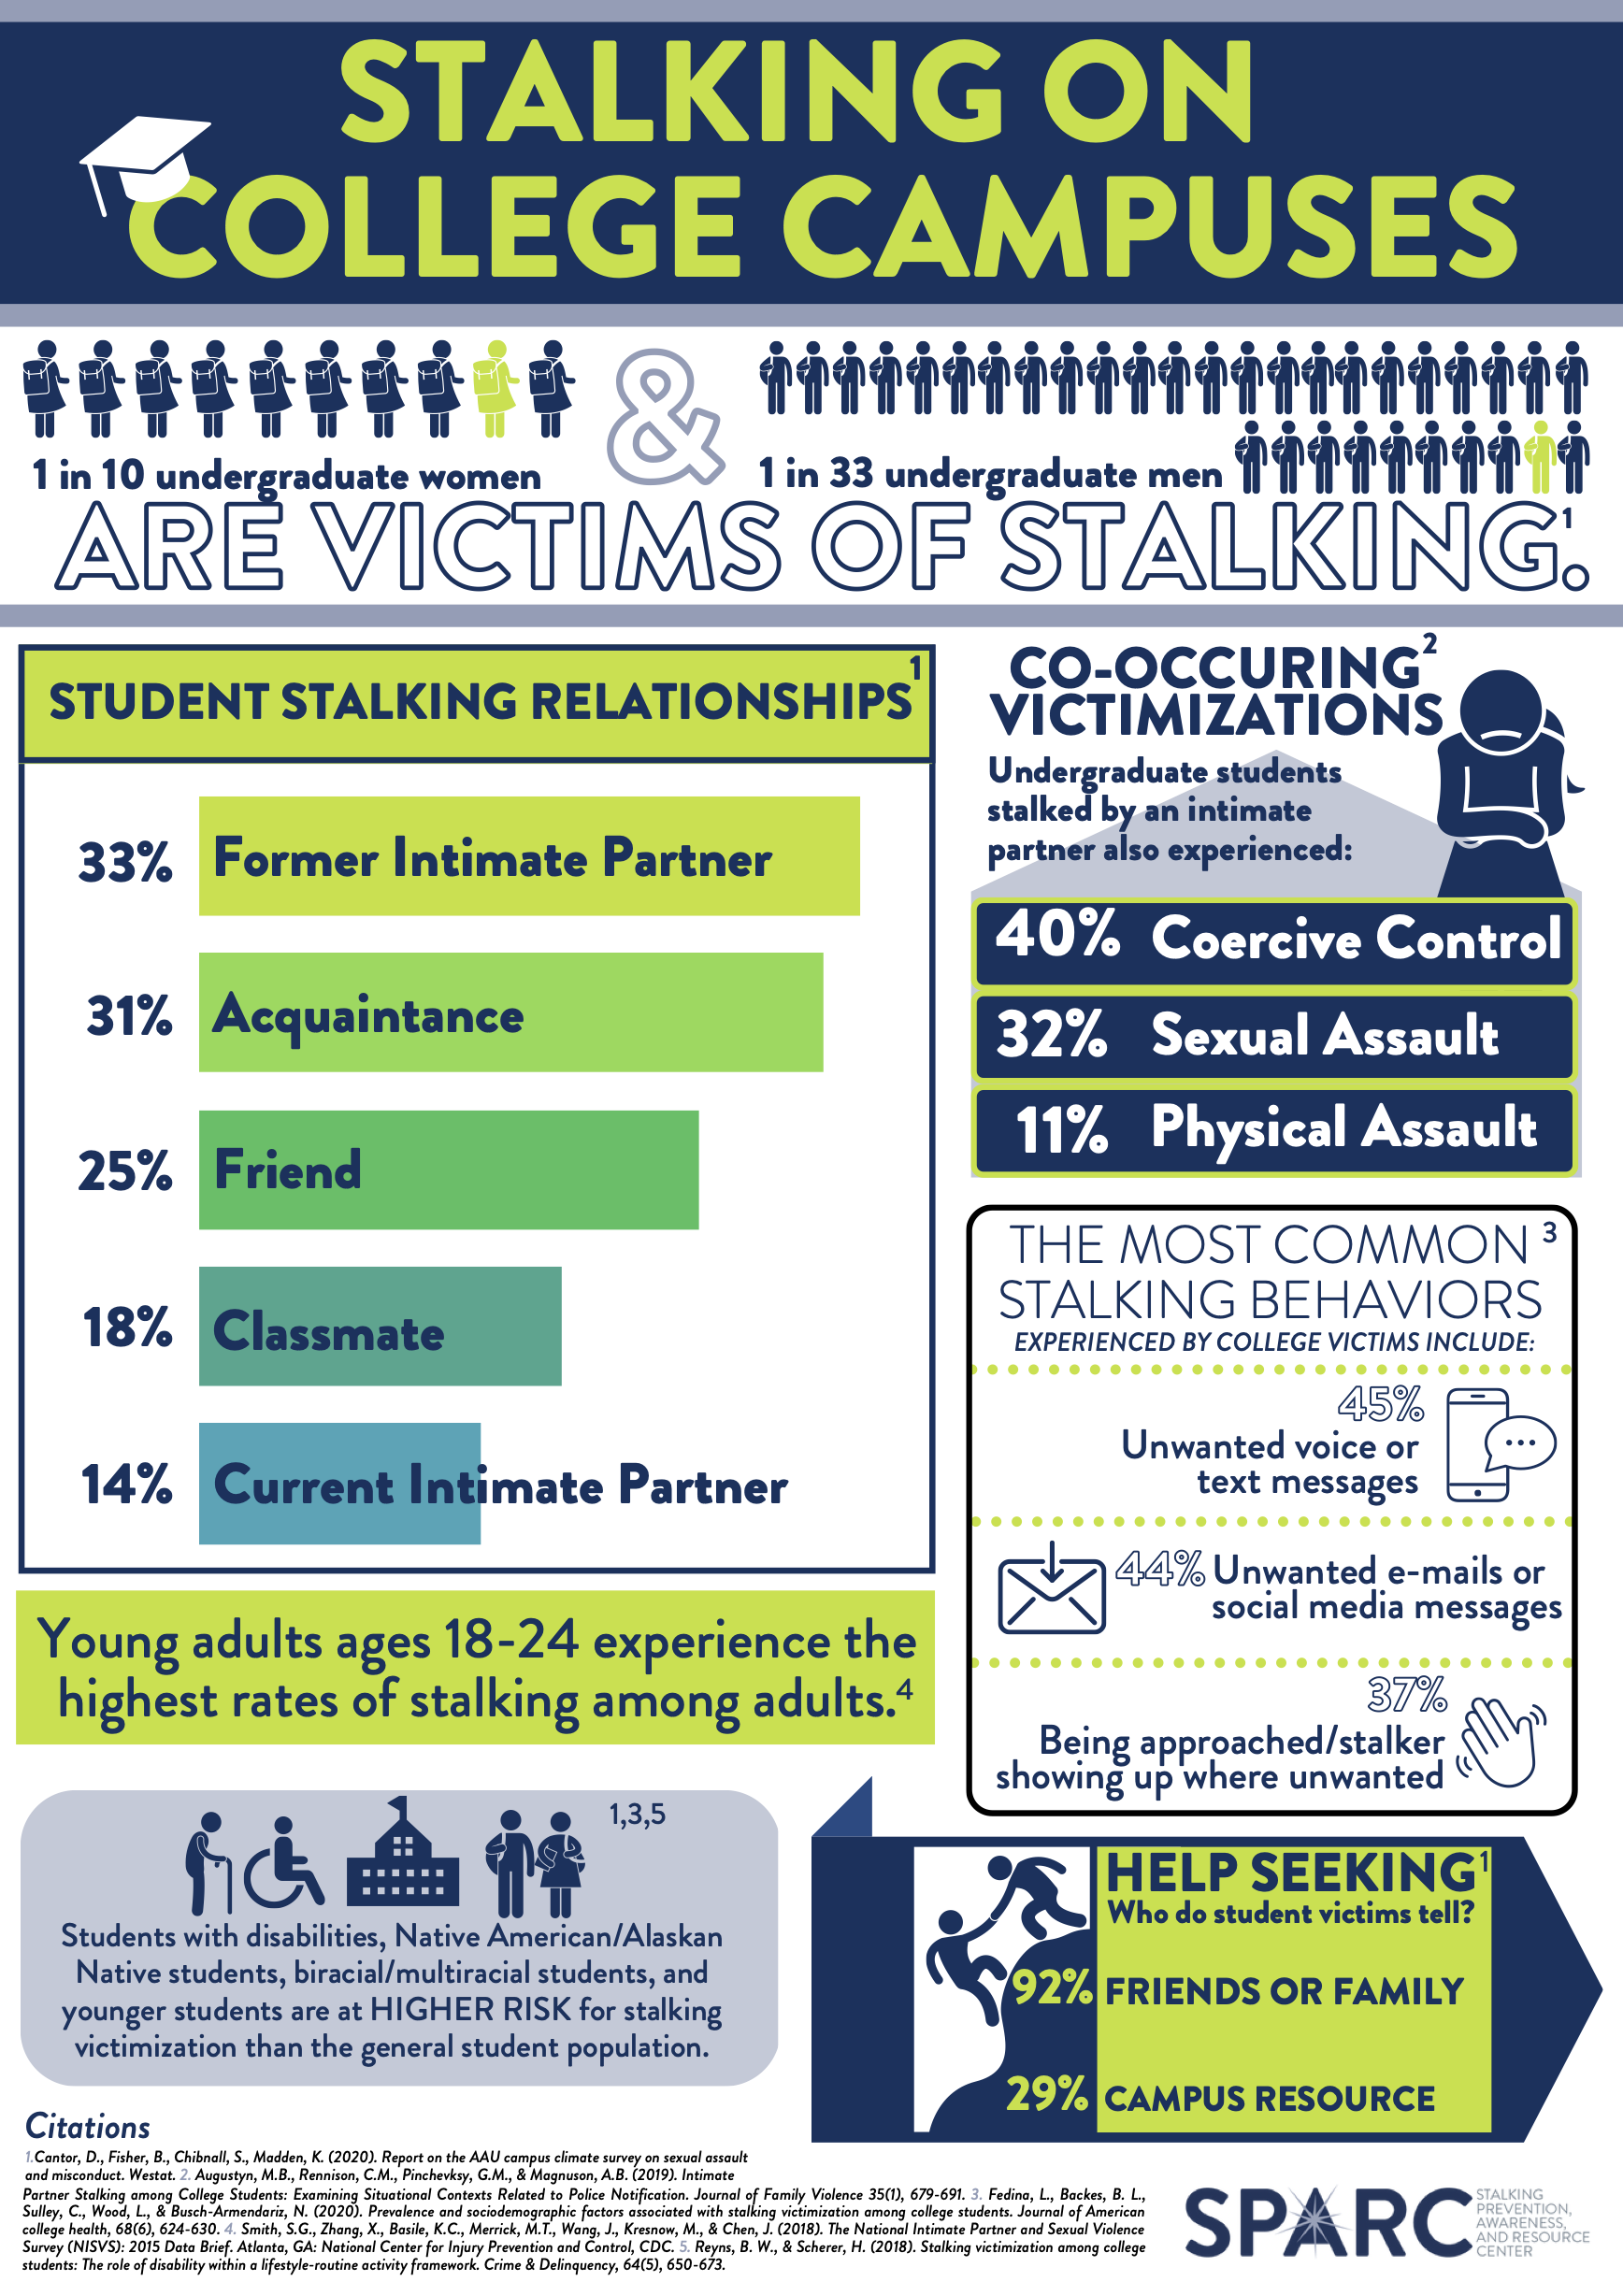 Stalking on campus infographic, click to view PDF